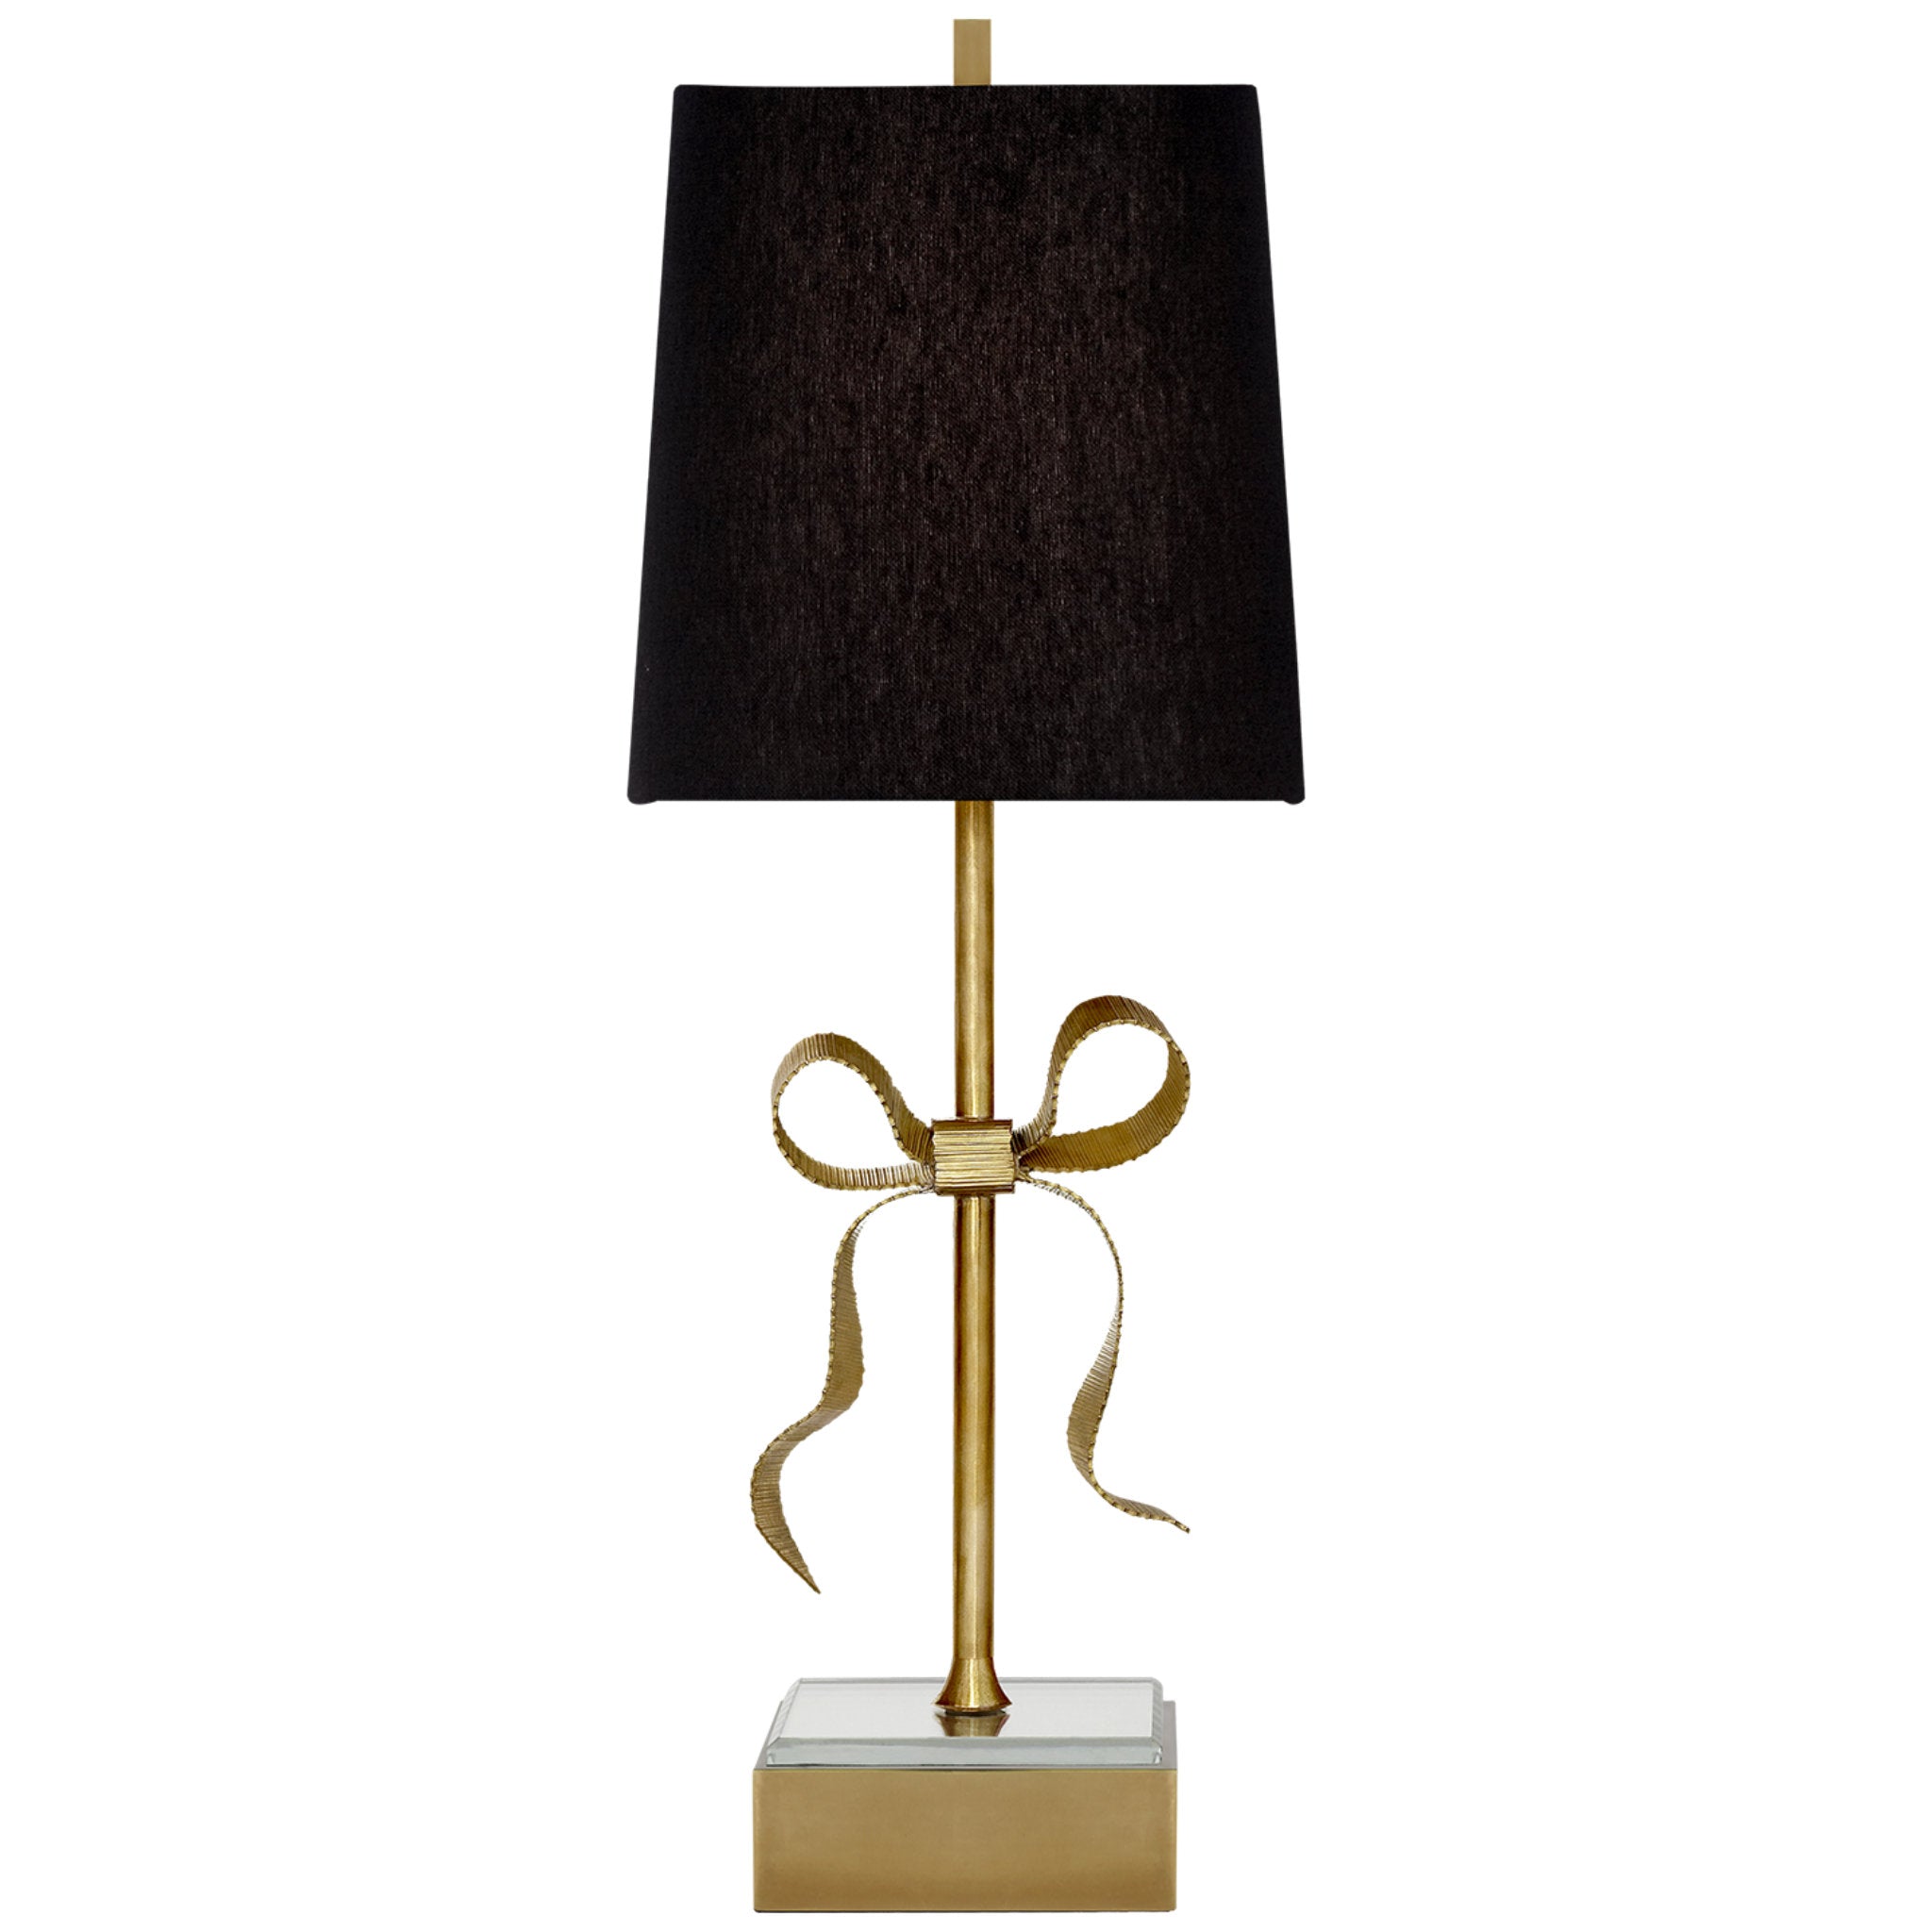 kate spade new york Ellery Gros-Grain Bow Table Lamp in Soft Brass and Mirror with Black Linen Shade